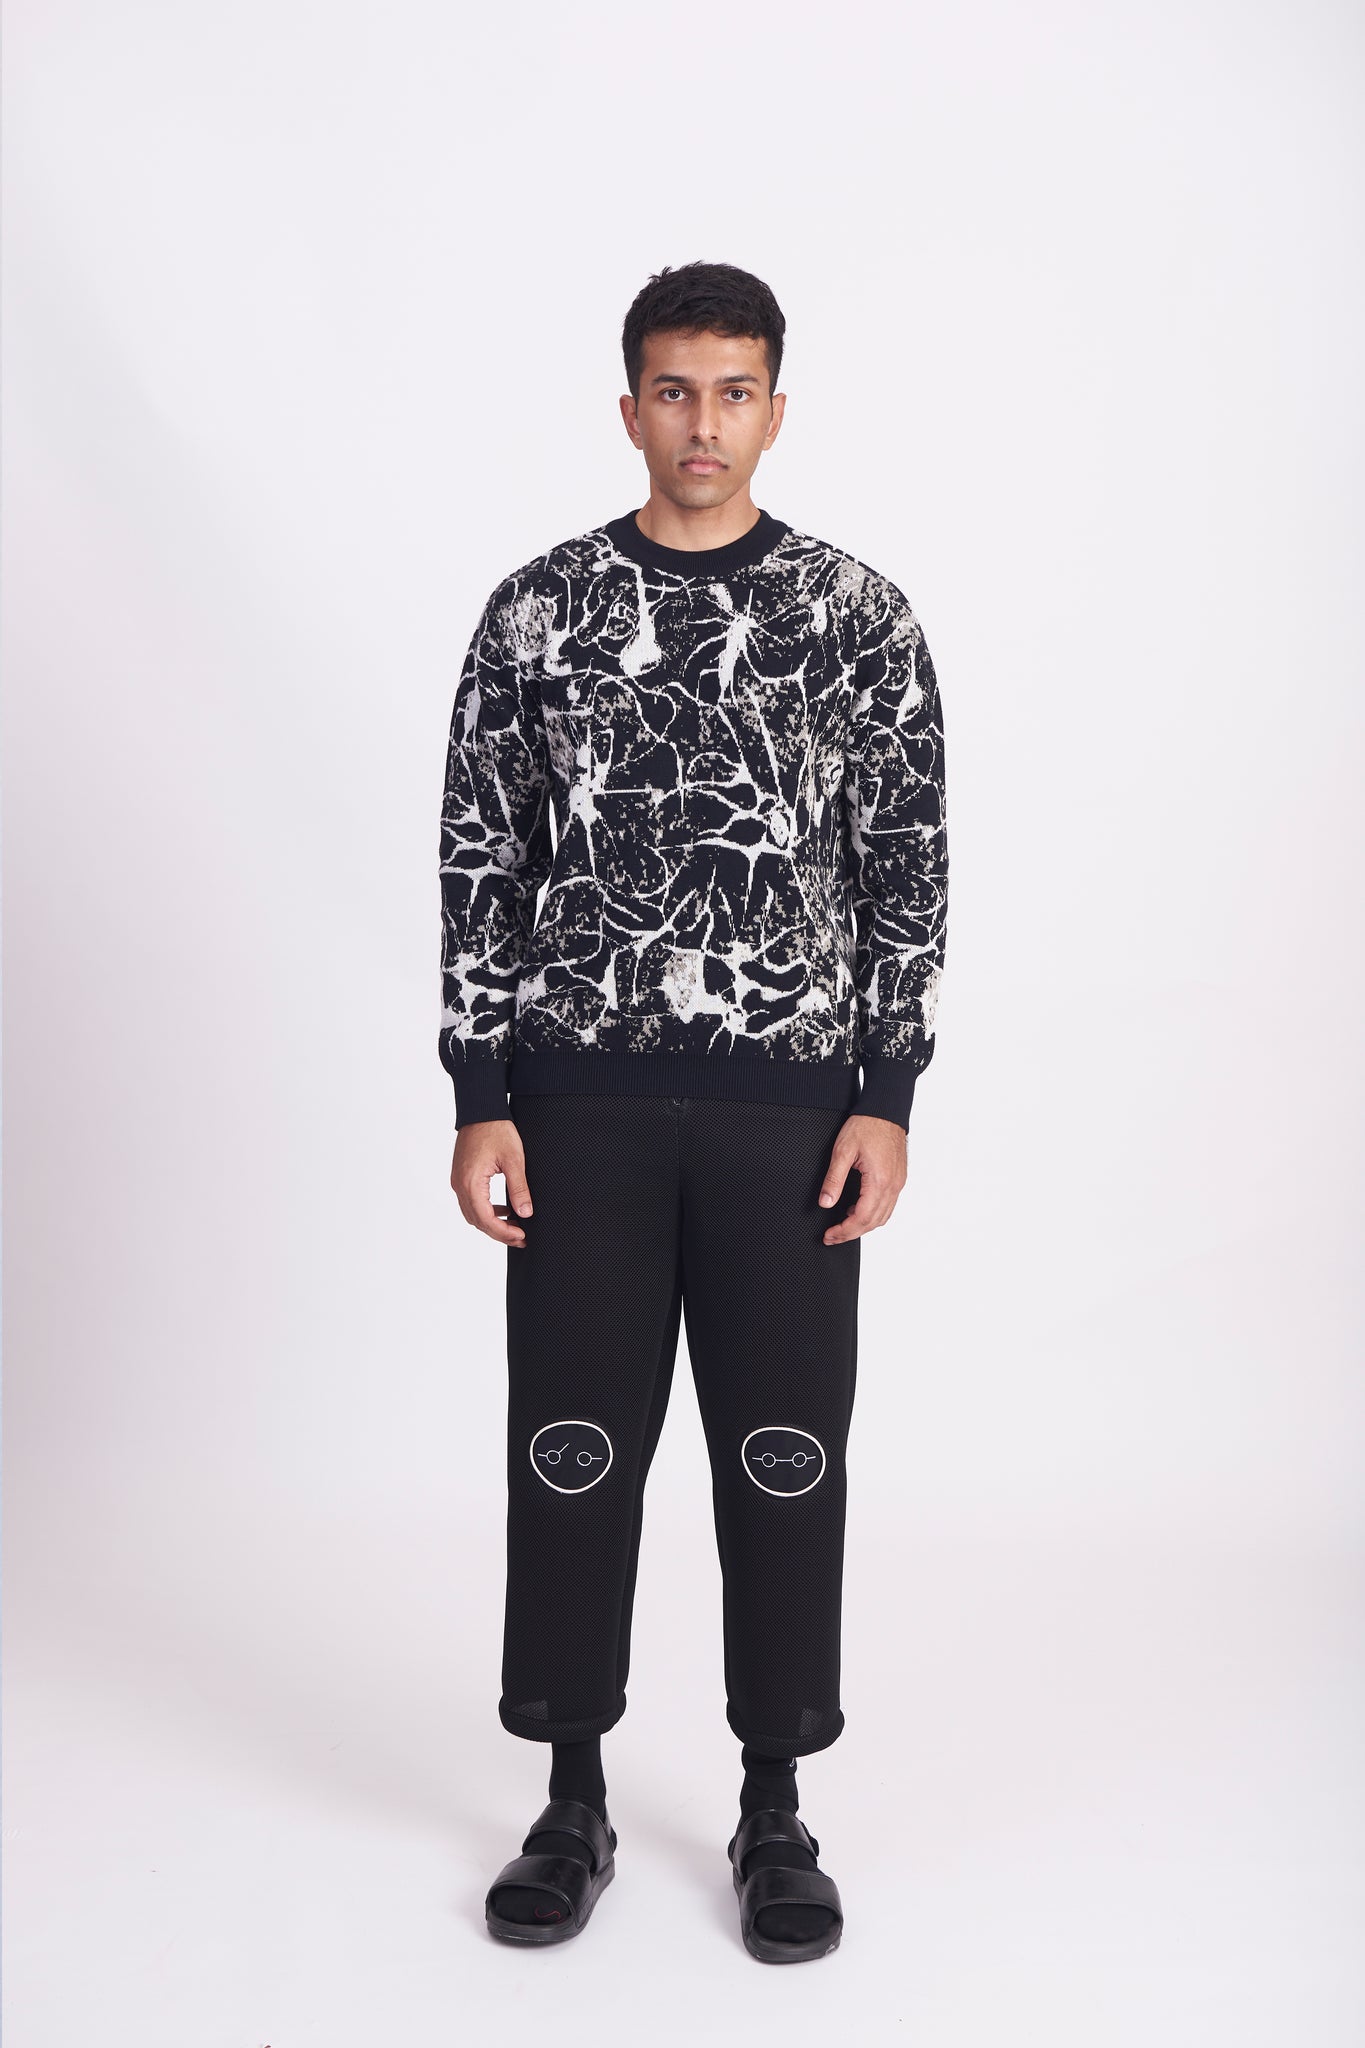 This soft 100% organic cotton knit sweater was designed with maximum comfort in mind. It features our ‘Neuron’ artwork.